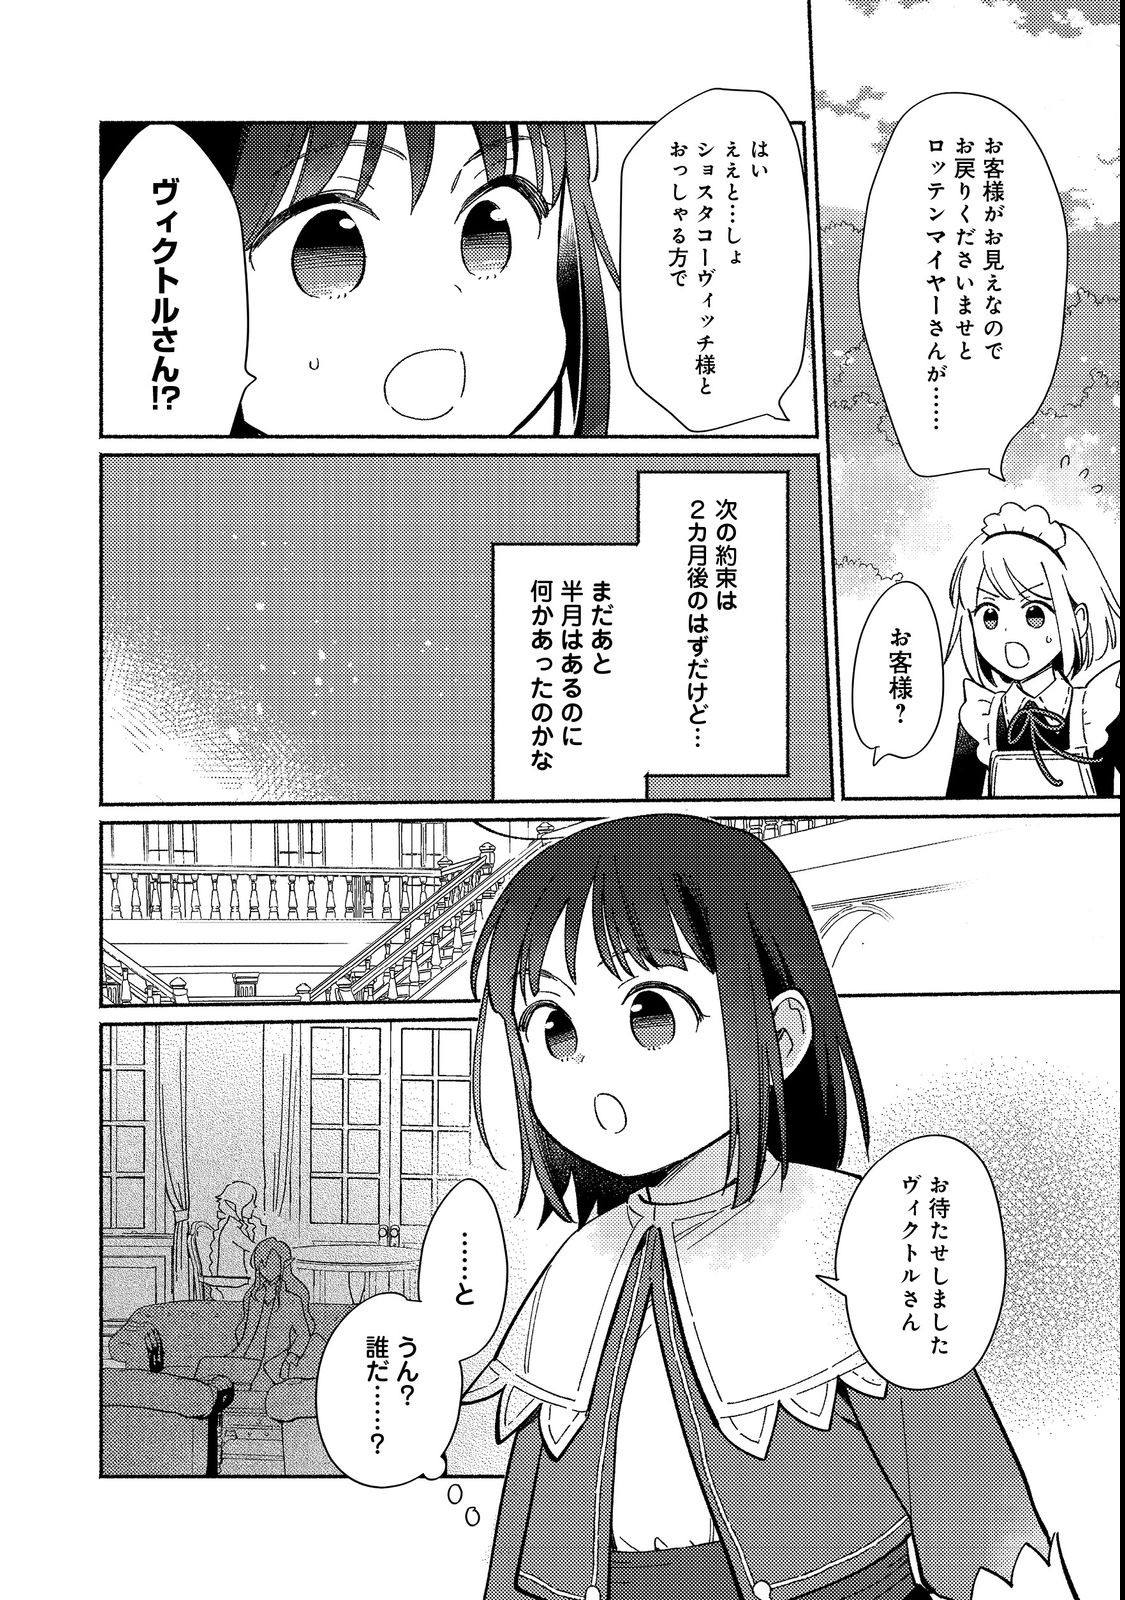 I’m the White Pig Nobleman 第17.1話 - Page 4